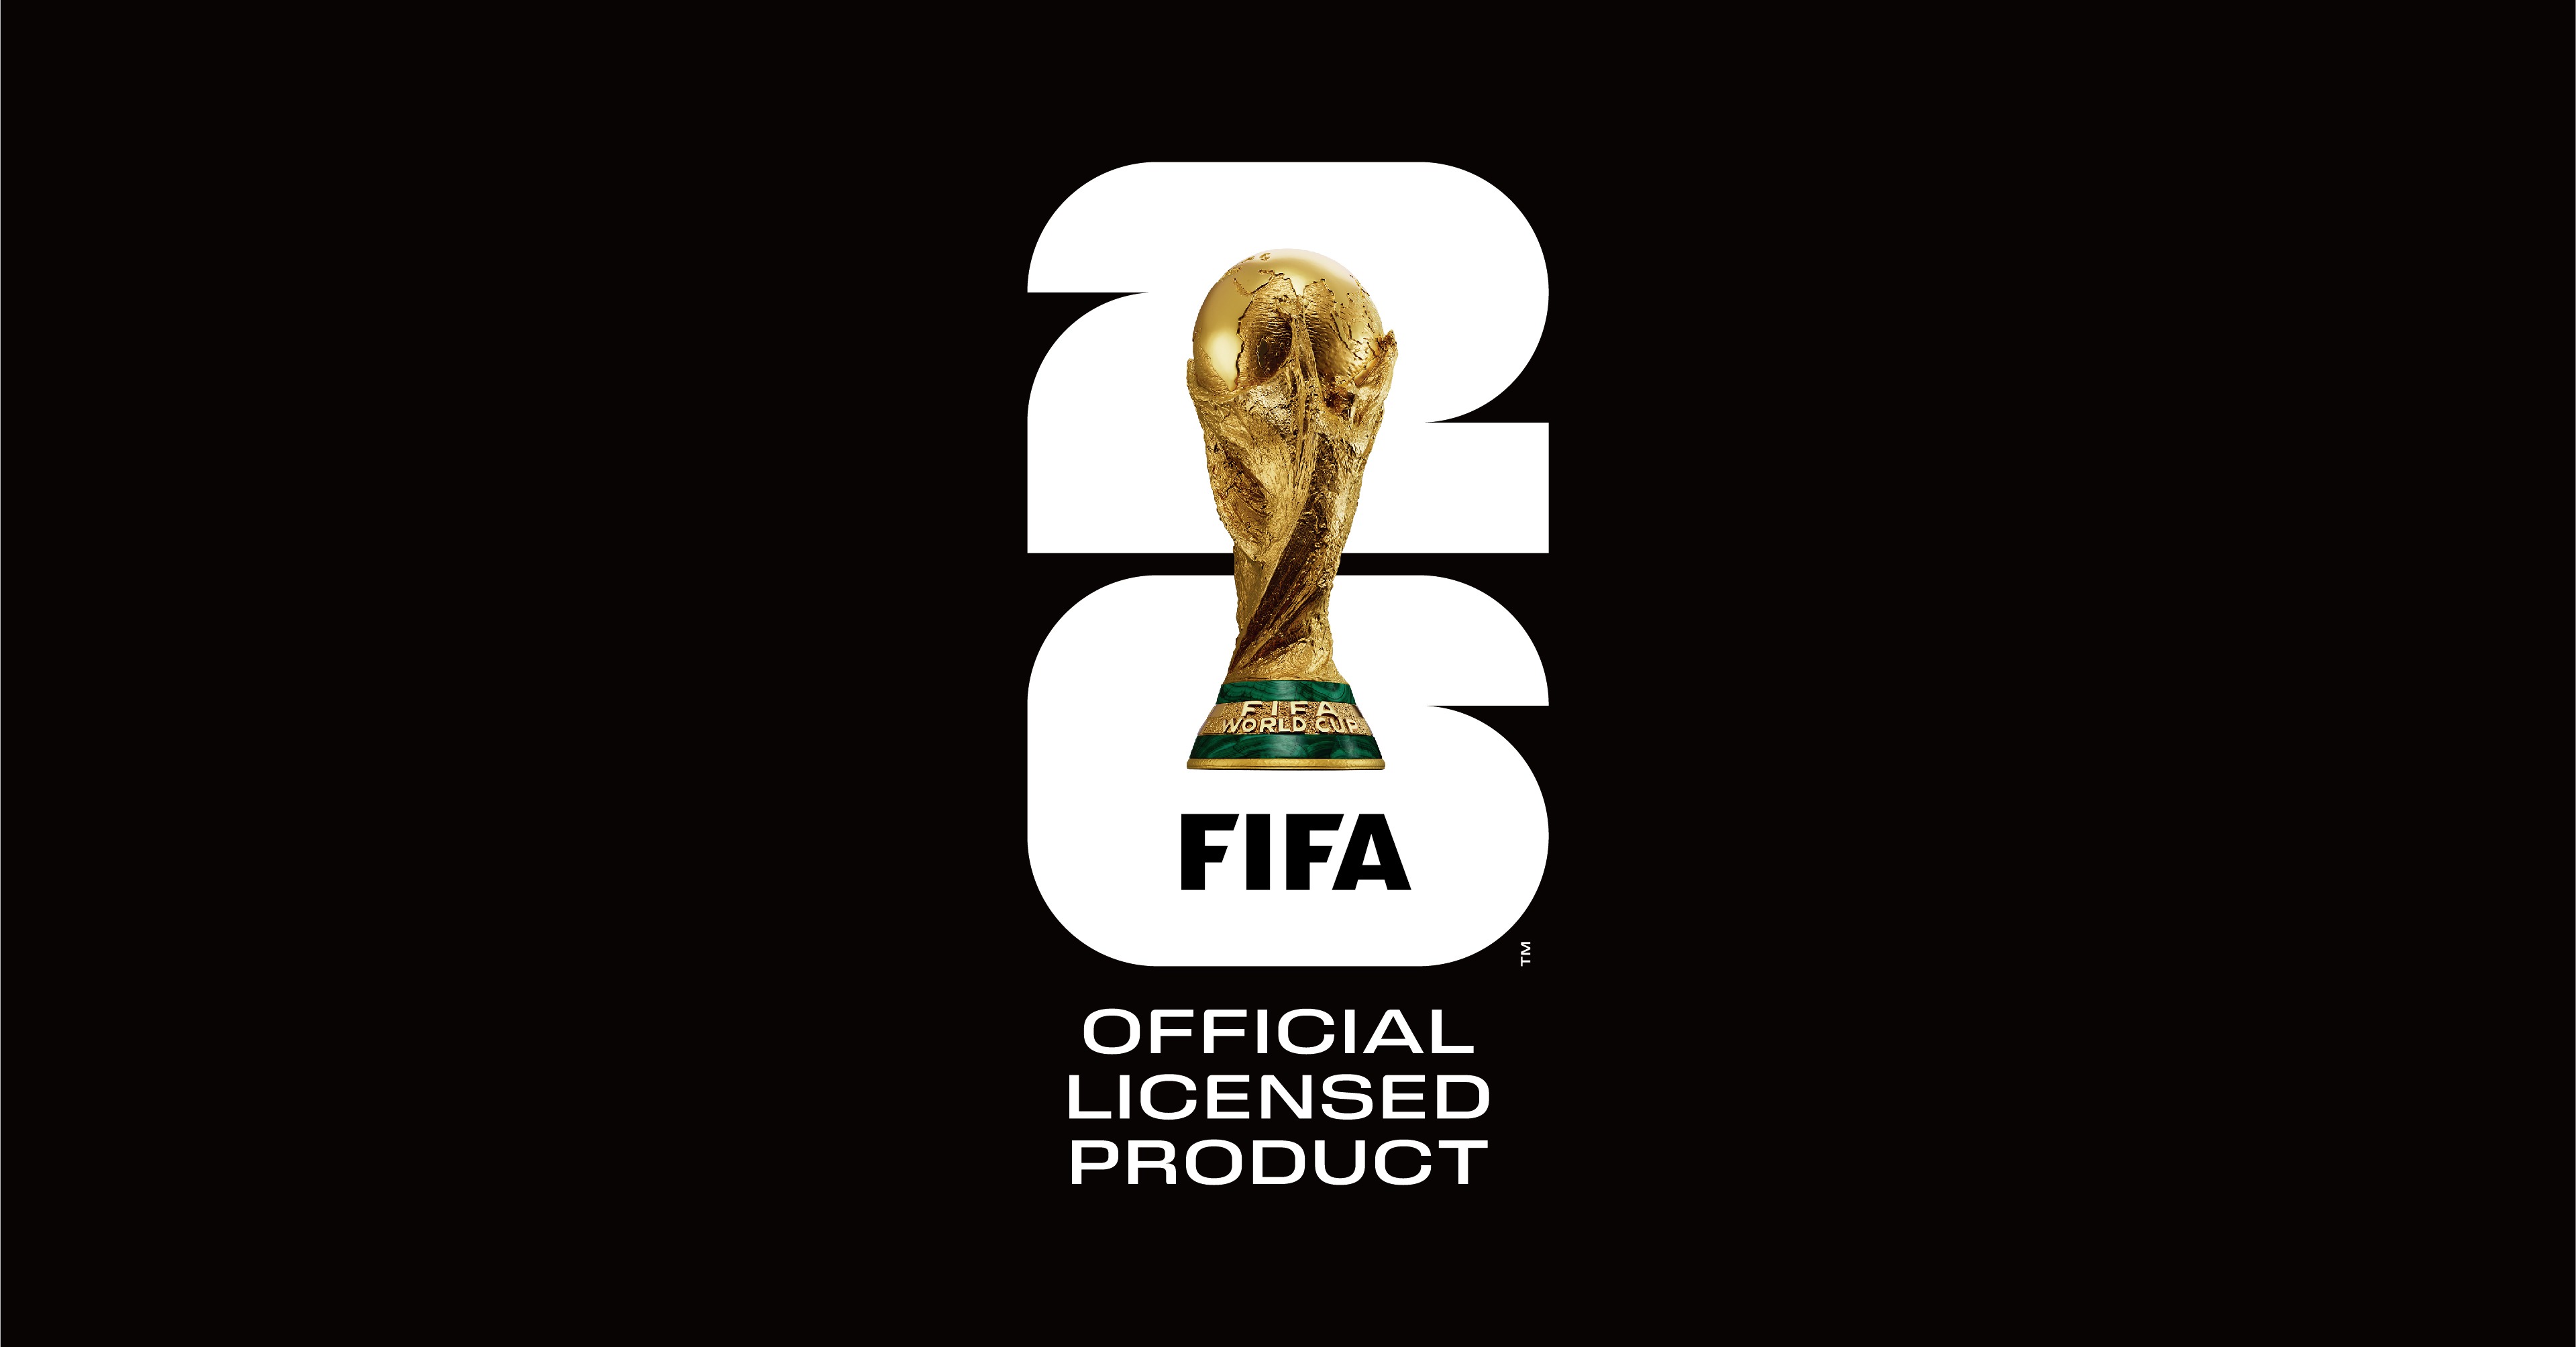 FIFA World Cup Official Licensed Products 302